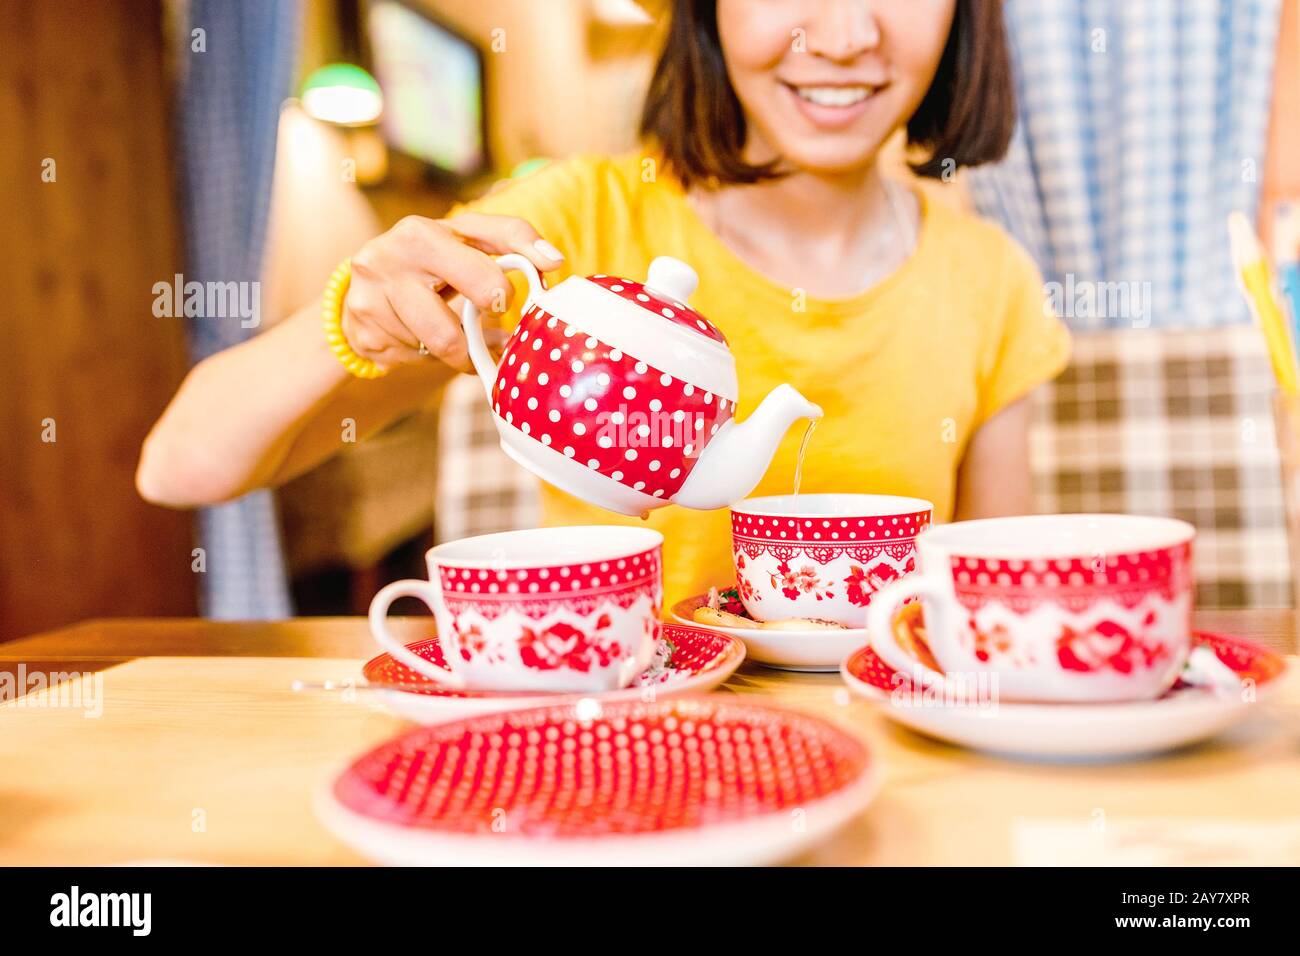 A girl in a cafe pours tea from a teapot into a mug. Stock Photo